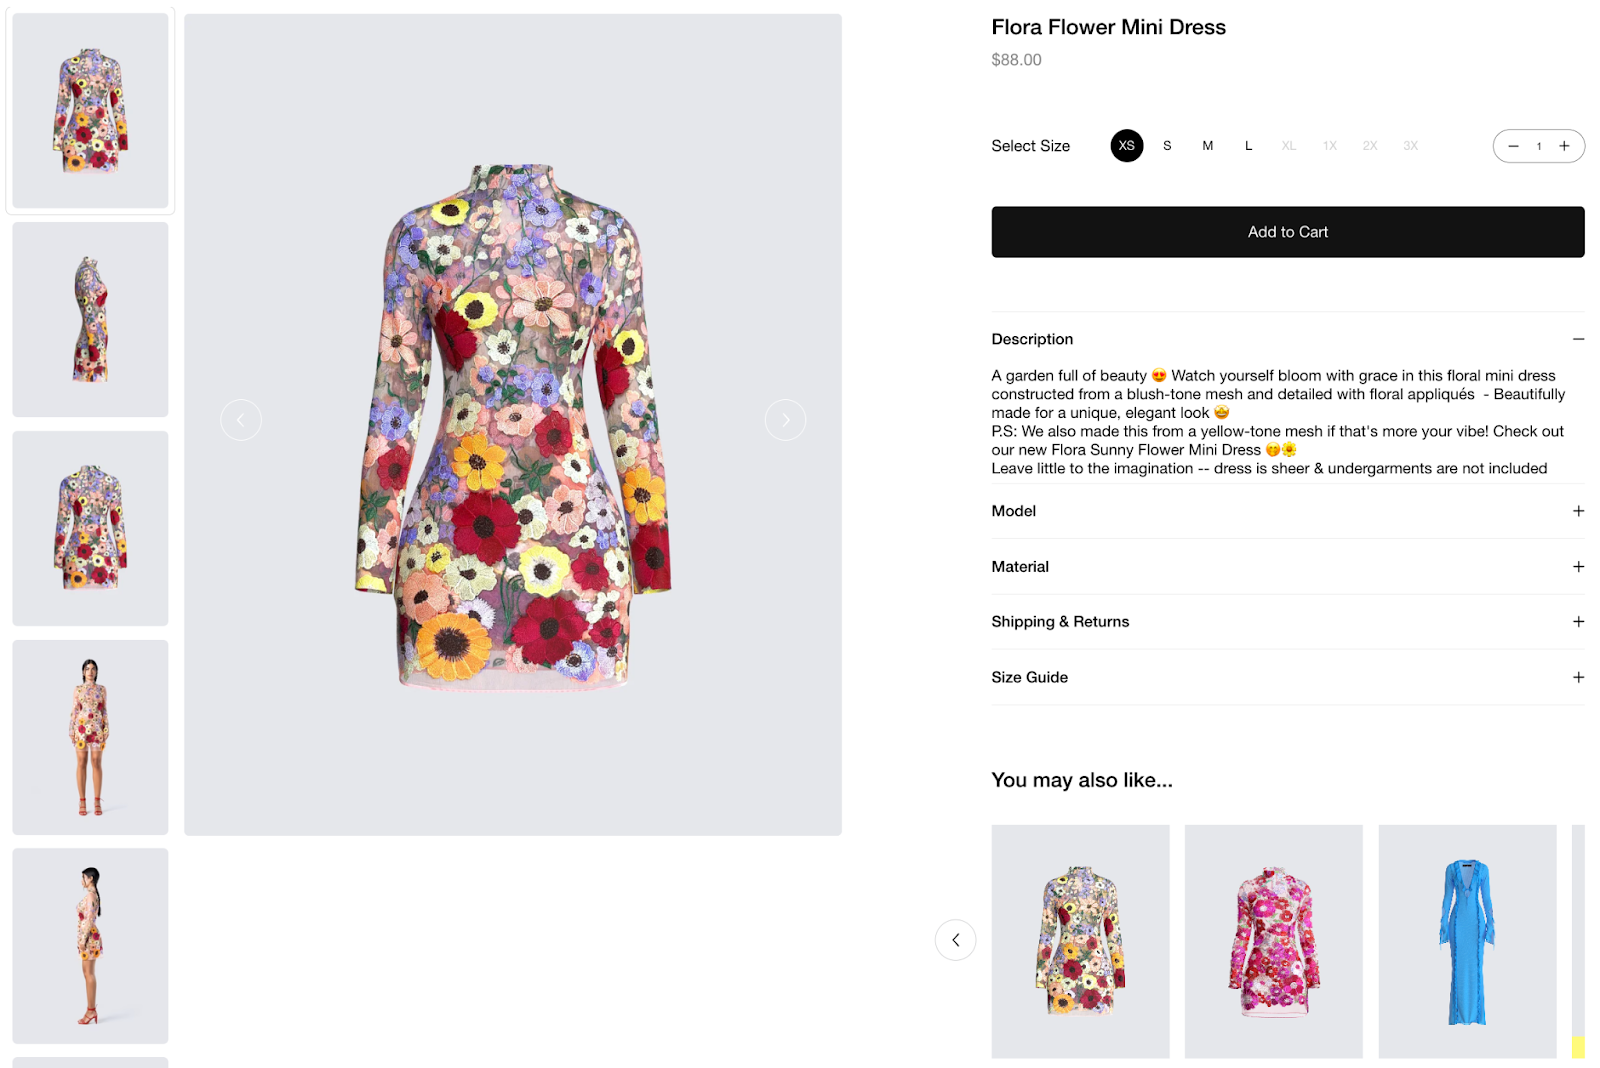 Screenshot of the generative AI product development concept for a flowered dress from FINESSE.